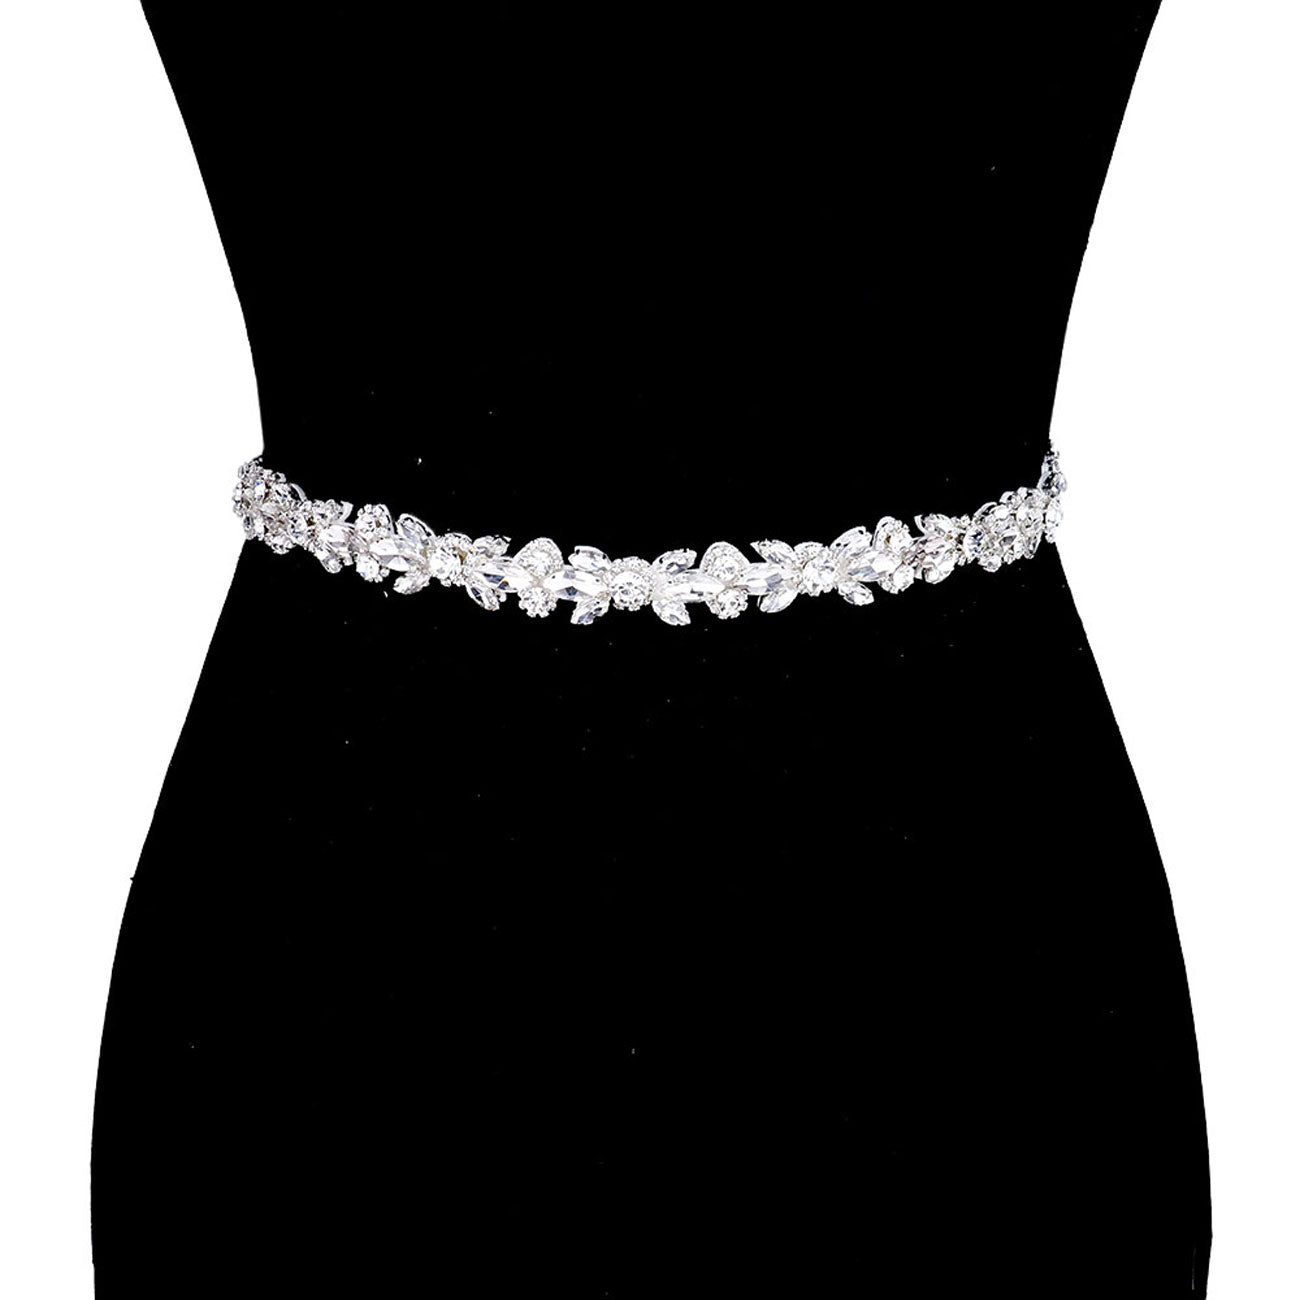 Silver Crystal Marquise Sash Ribbon Bridal Wedding Belt Headband, crystal applique is the newest trend and excellent embellishment for different occasions, especially for the bridal wedding, make you charming and graceful. This is a must have accessory for your very own special day. Perfect for brides, bridal parties, and any other formal occasion.